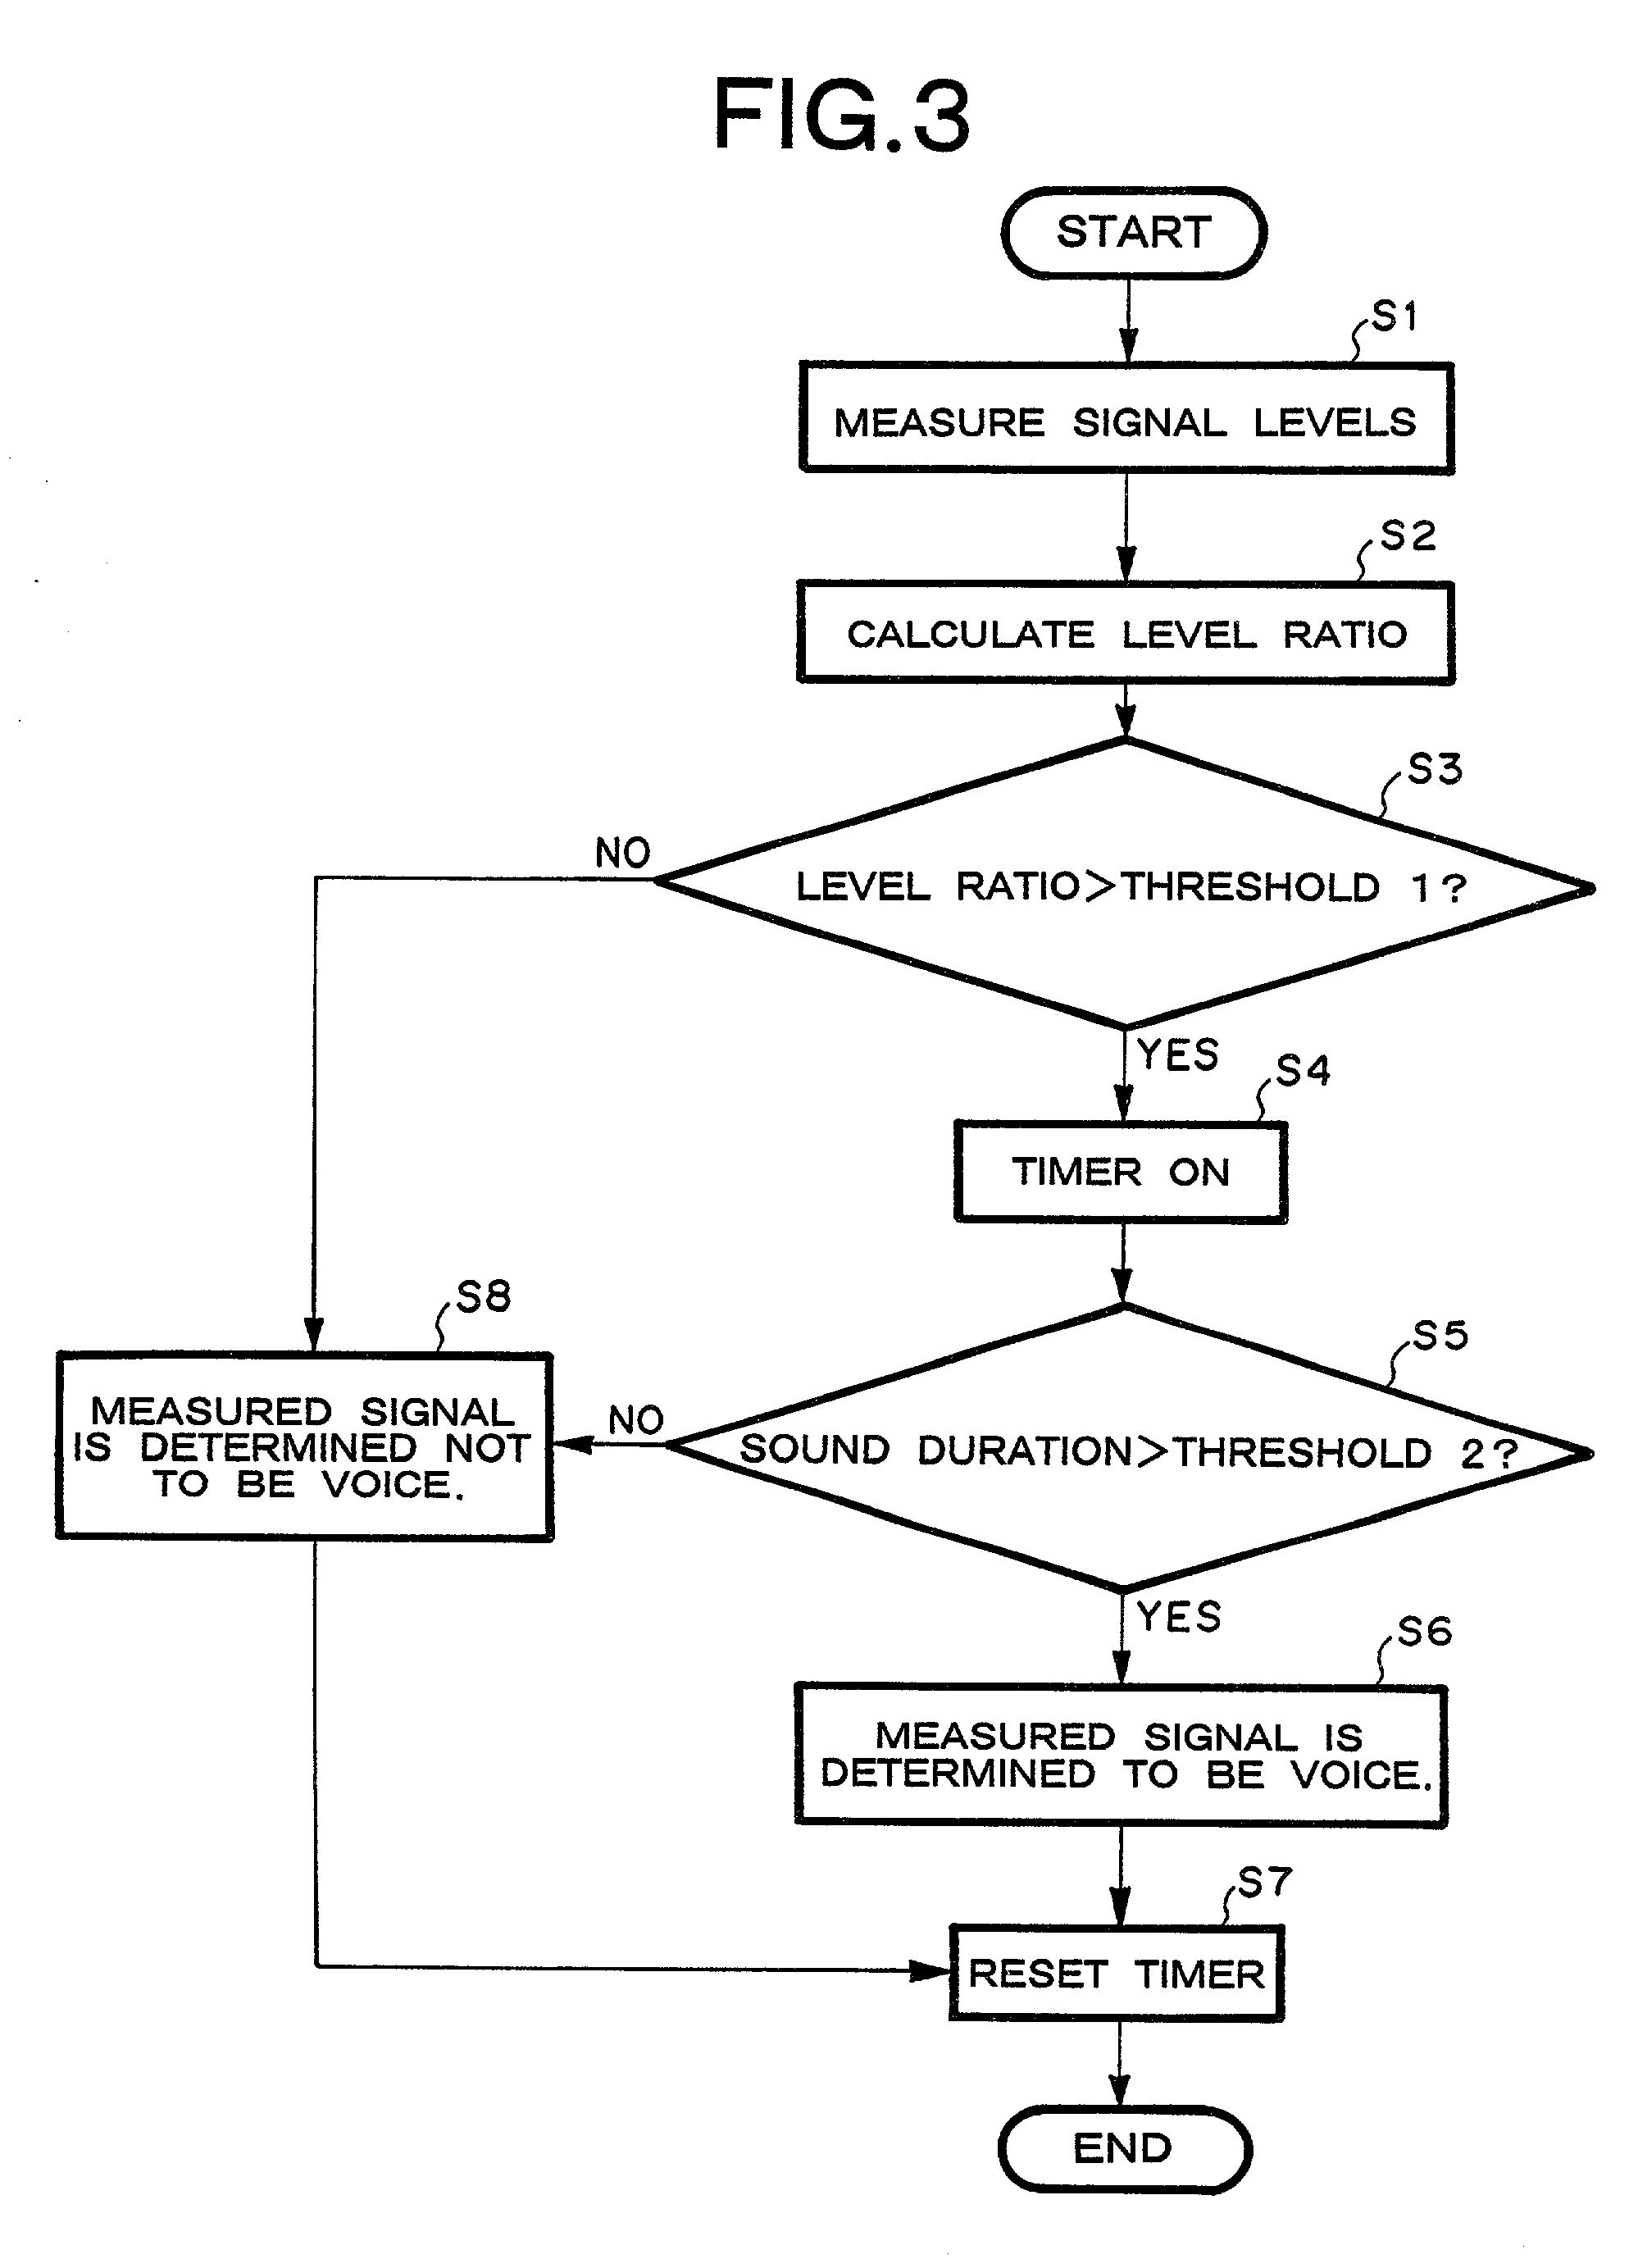 Apparatus for detecting direction of sound source and turning microphone toward sound source